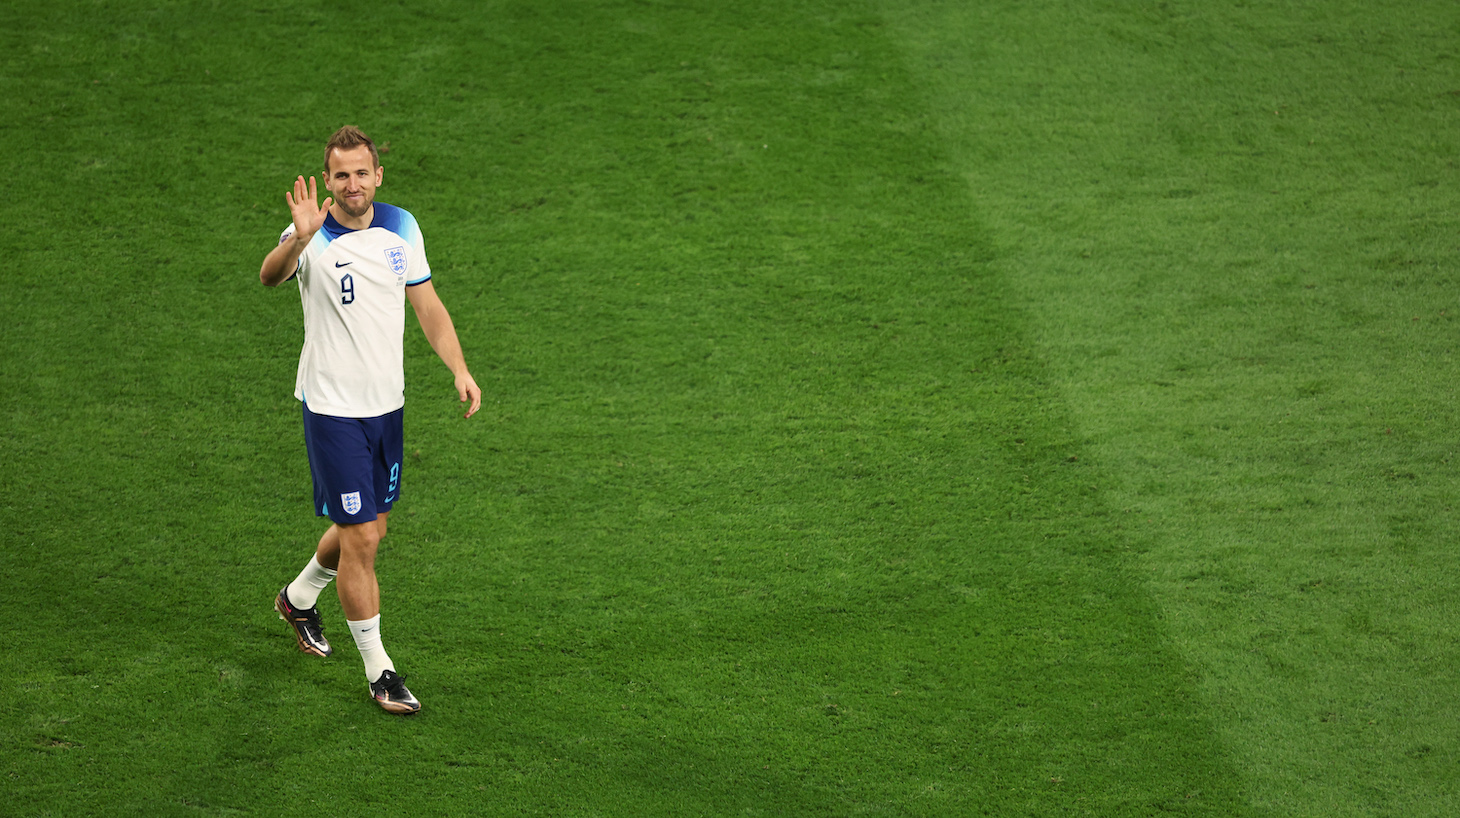 Harry Kane of England walks around the pitch after being substituted during the FIFA World Cup Qatar 2022 Group B match between England and IR Iran at Khalifa International Stadium on November 21, 2022 in Doha, Qatar.